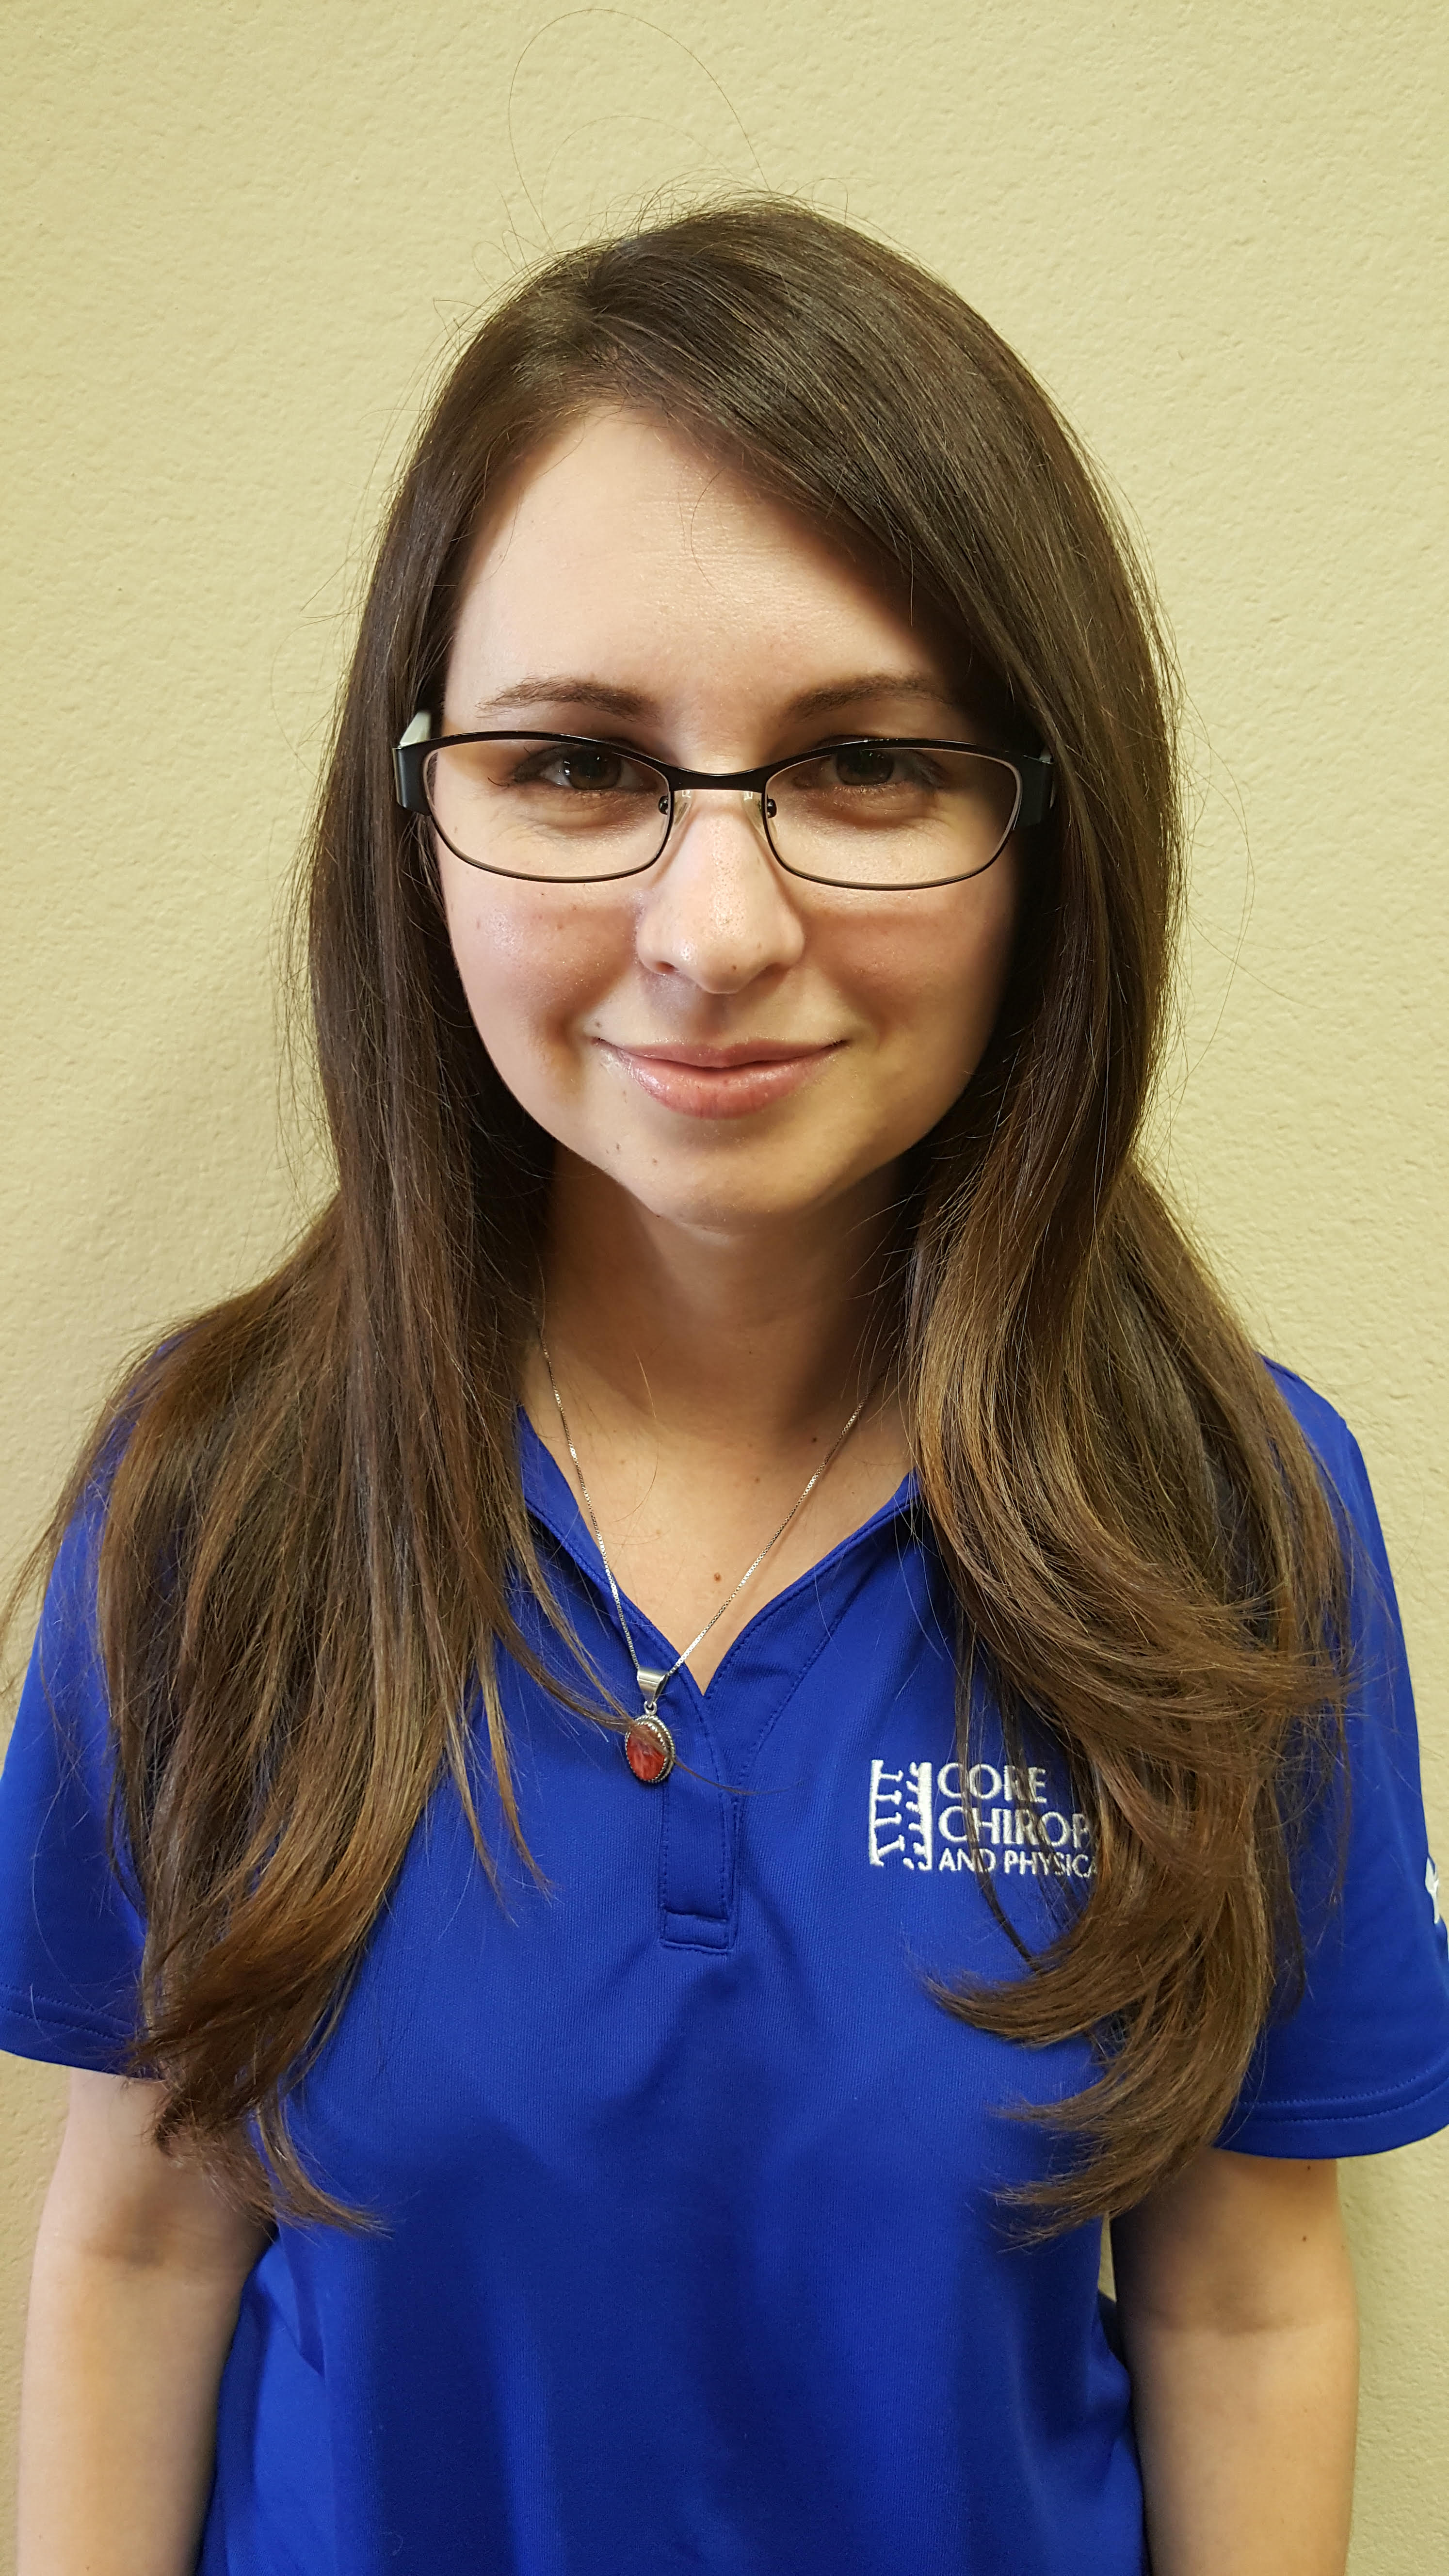 Core Chiropractic - Tiffany Office Manager - Your Flower Mound Chiropractor